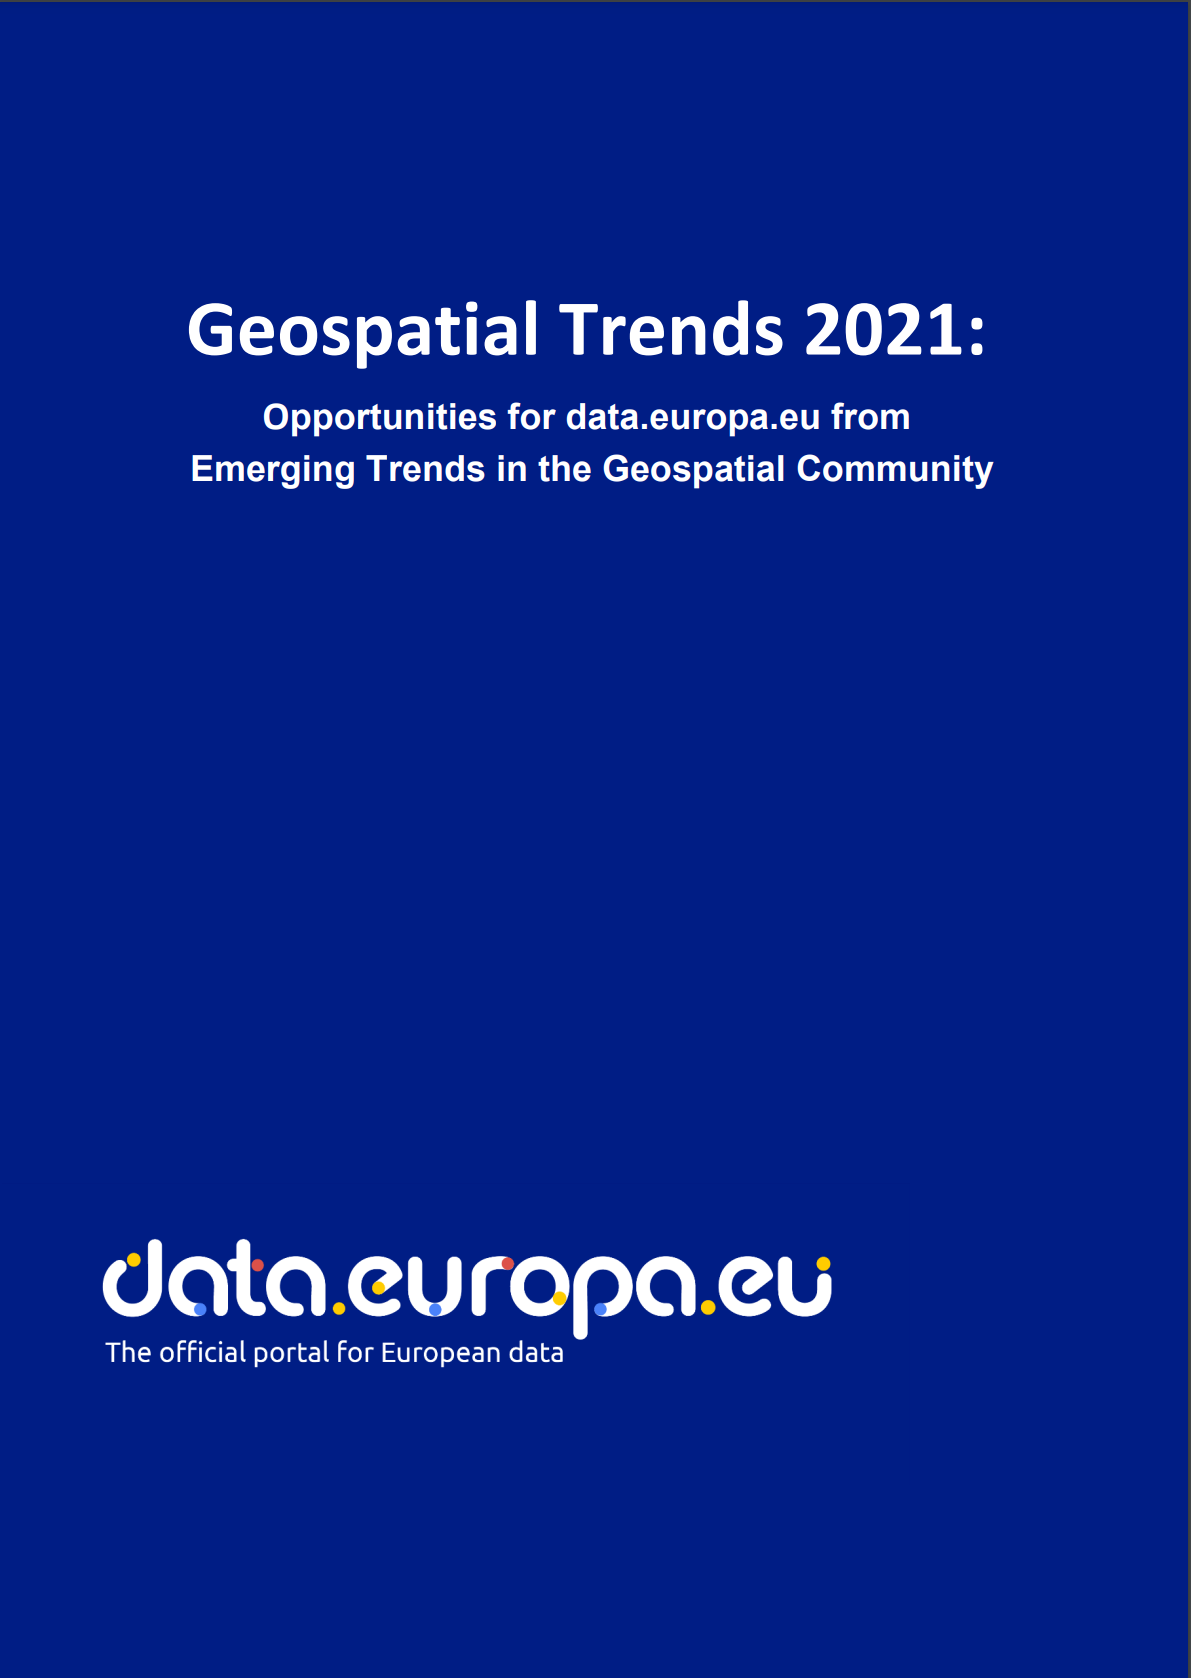 Geospatial trends 2021: Opportunities for data.europa.eu from emerging trends in the geospatial community